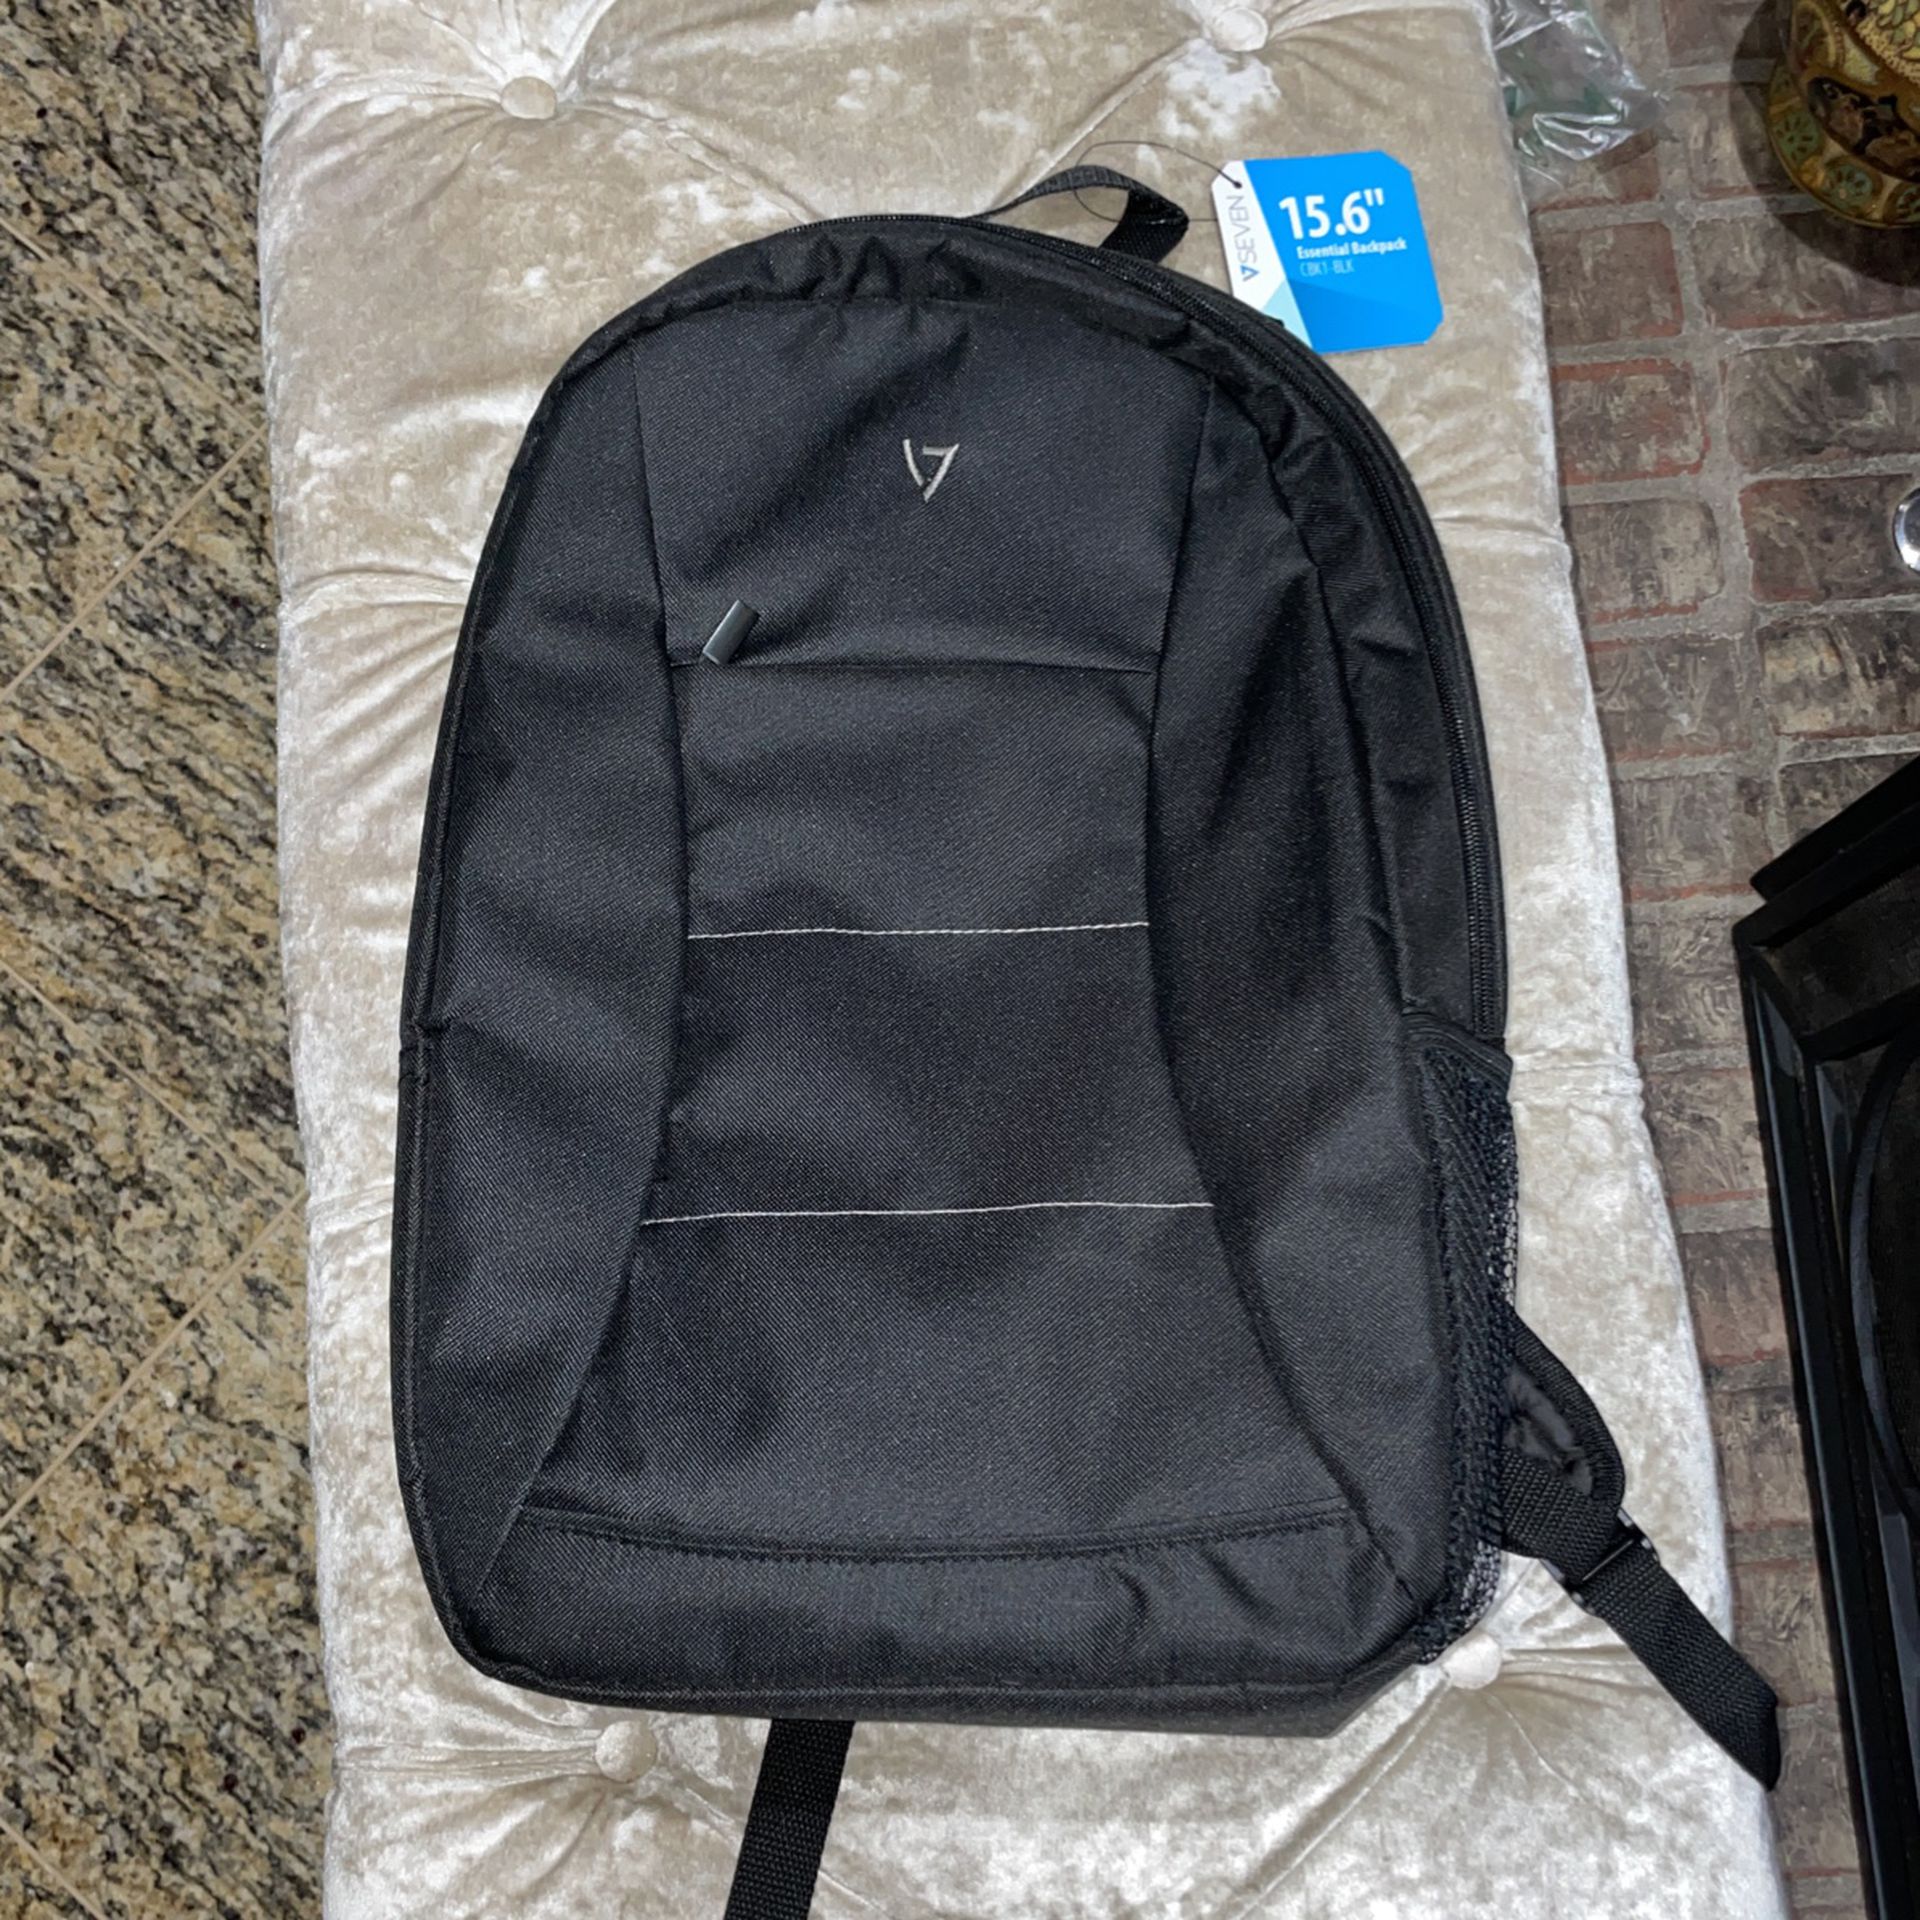 VSeven Essentials 15.6” Laptop Bag Brand New With Tags Black